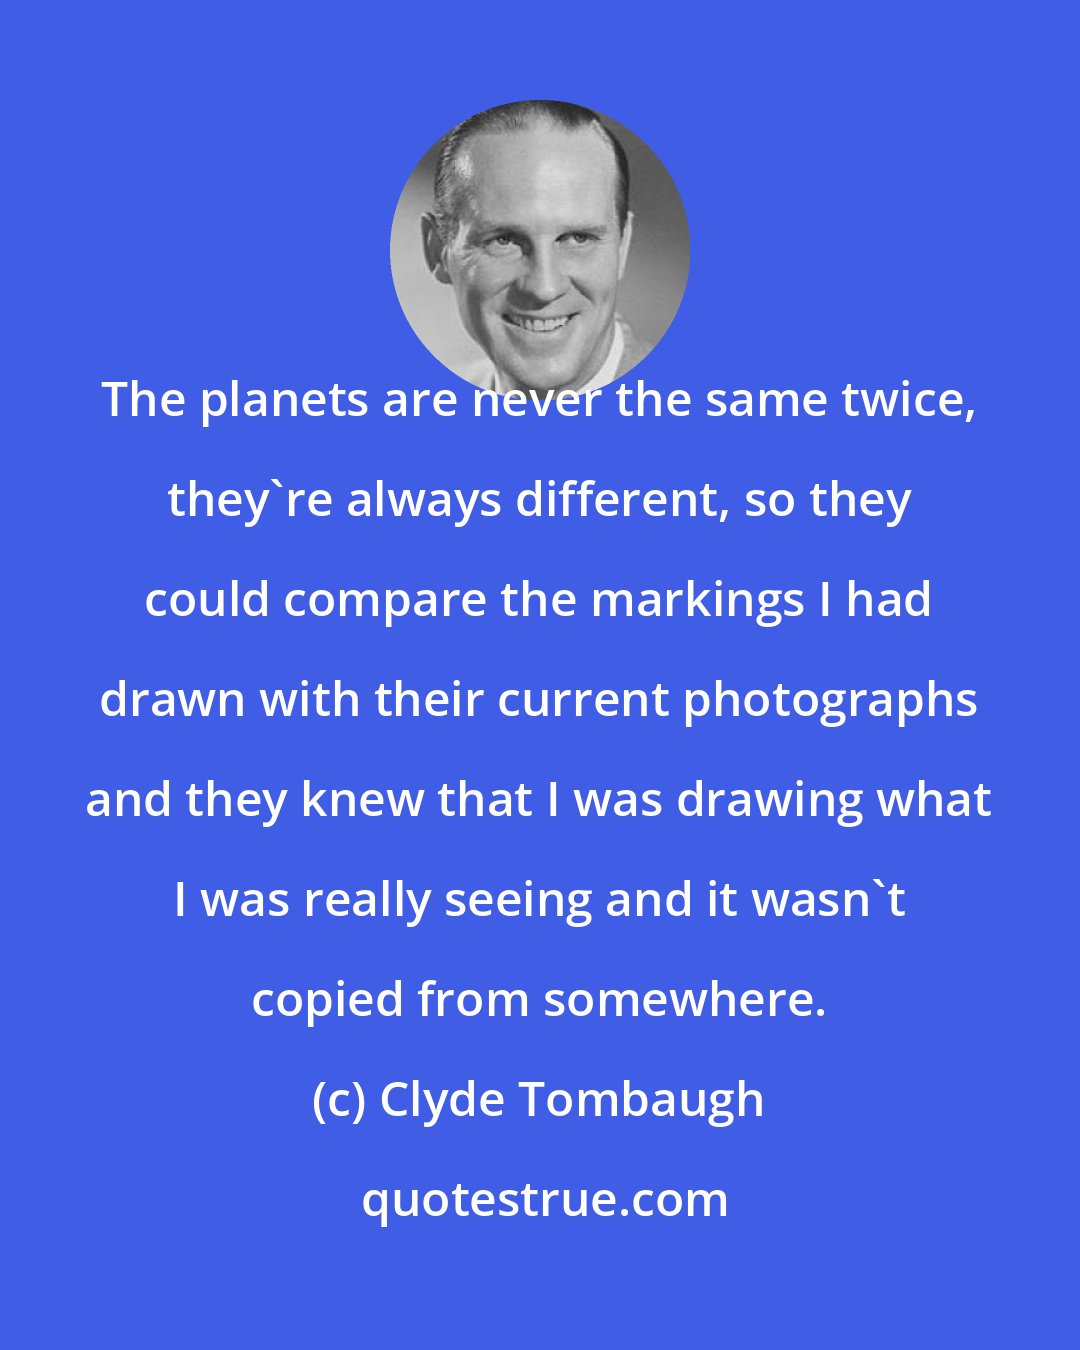 Clyde Tombaugh: The planets are never the same twice, they're always different, so they could compare the markings I had drawn with their current photographs and they knew that I was drawing what I was really seeing and it wasn't copied from somewhere.